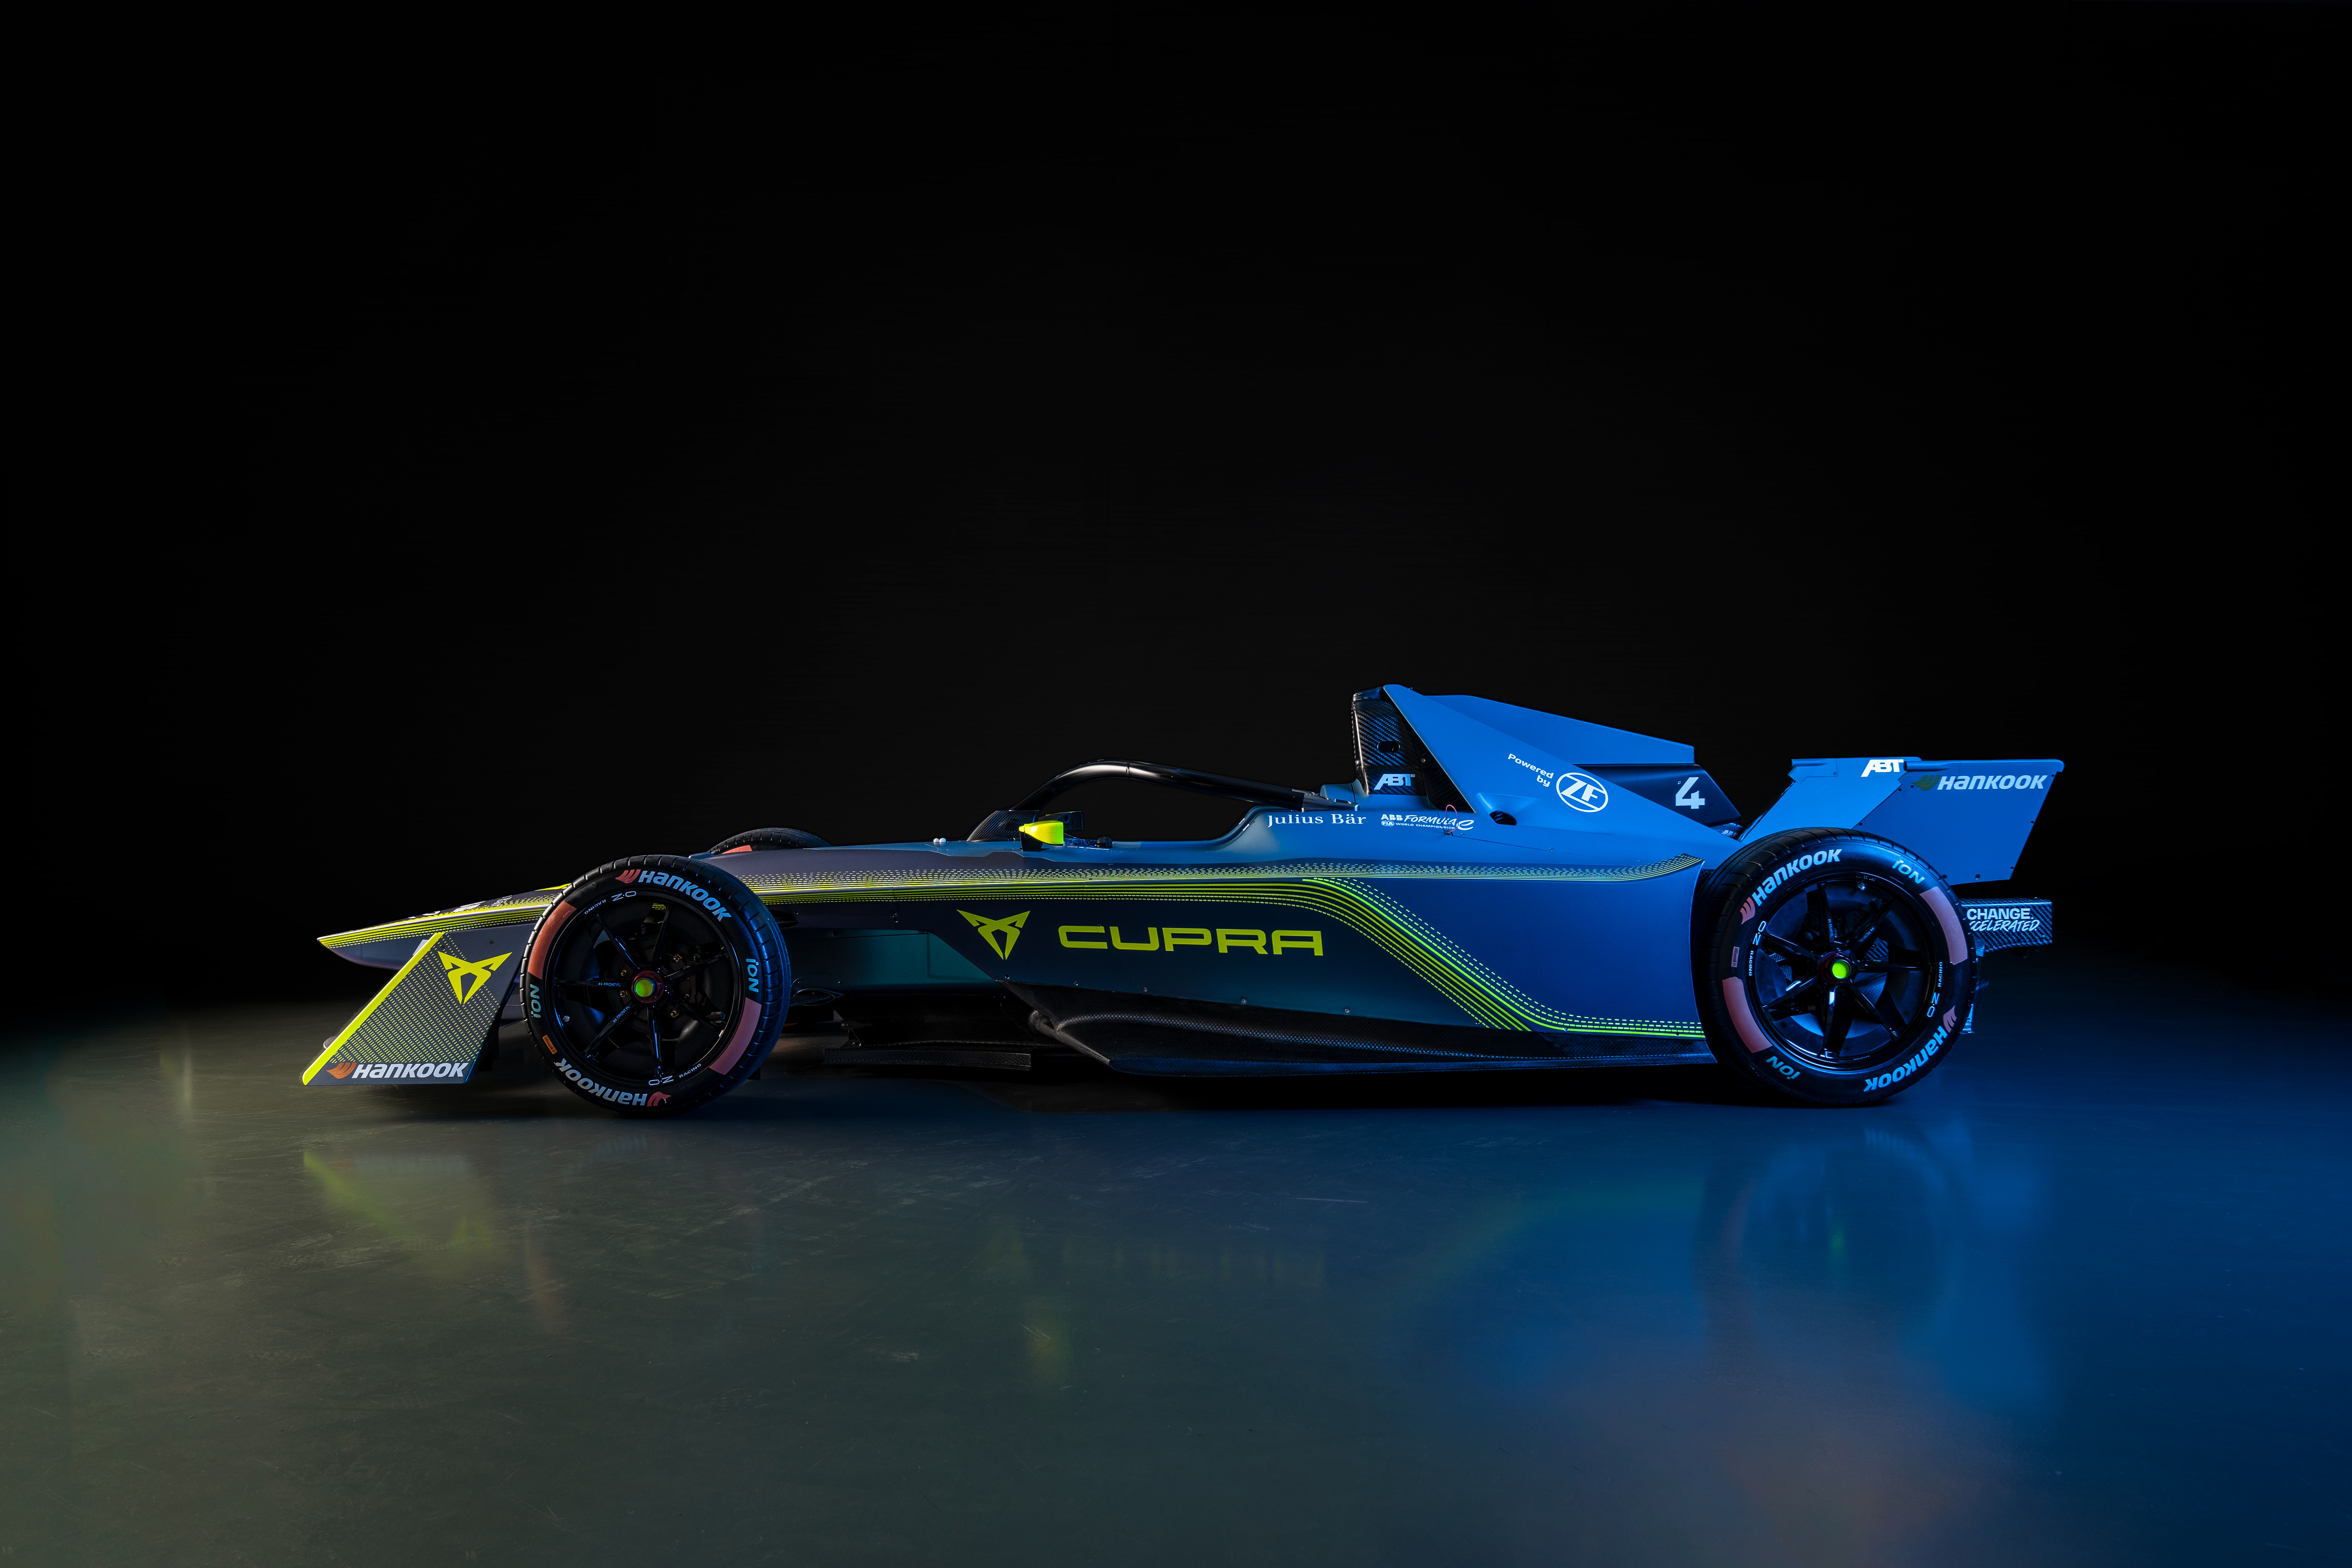 CUPRA further strengthens its commitment to electric motorsport as it joins ABT to compete in Formula E 